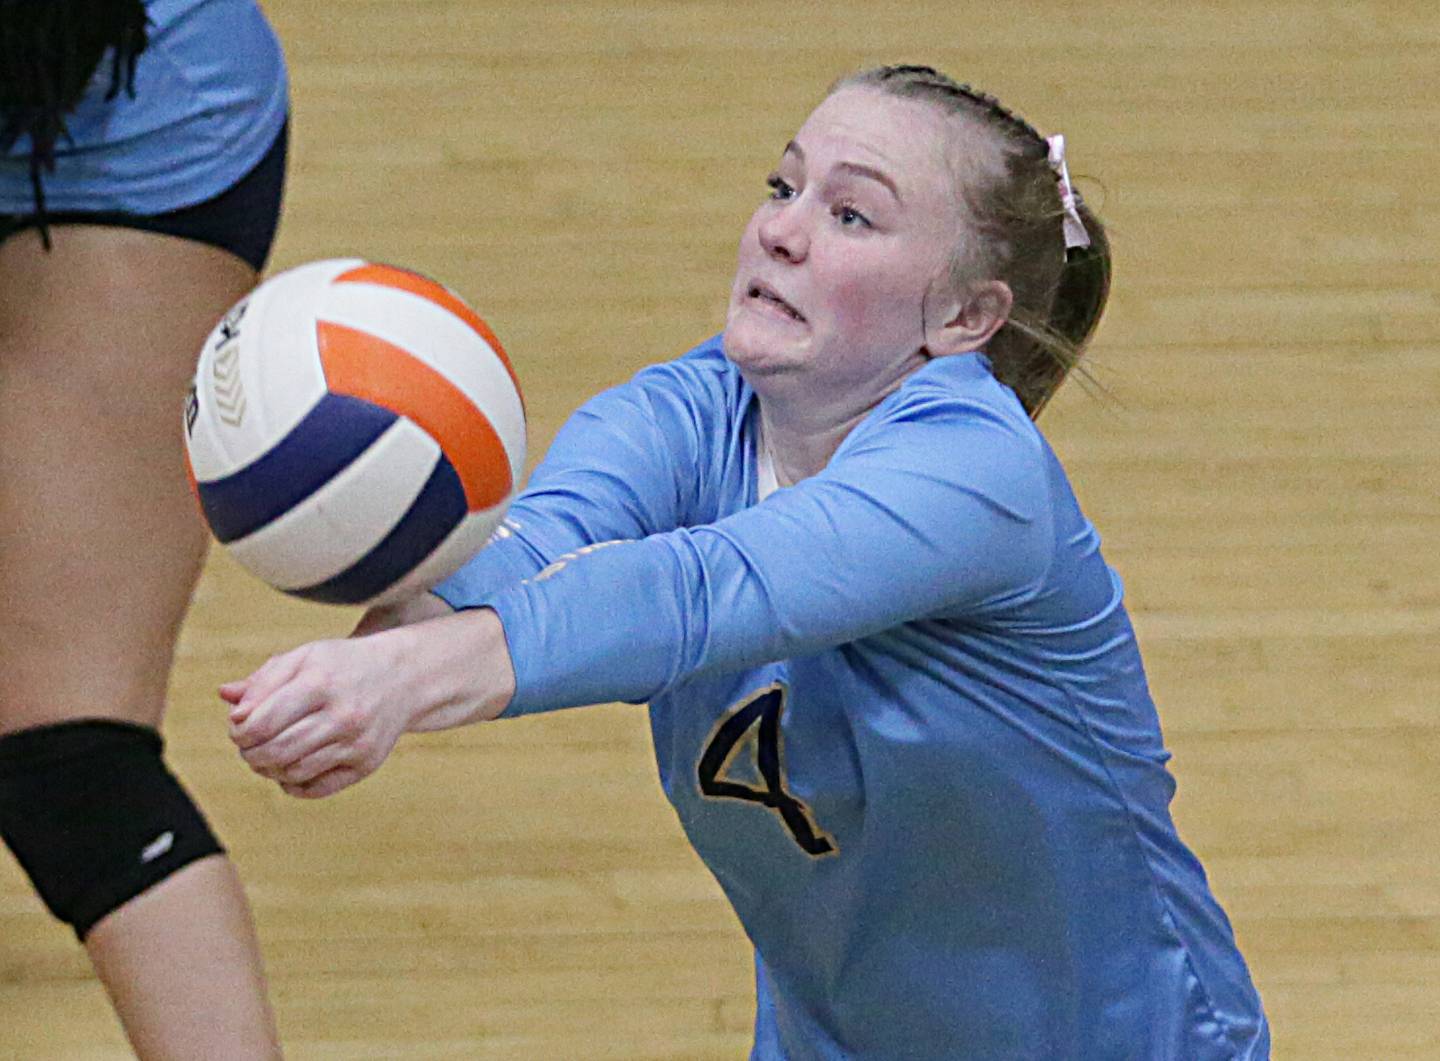 Marquette's Kaylee Killelea hits the ball against St. Bede on Monday, Oct. 17, 2022 at Bader Gymnasium in Ottawa.